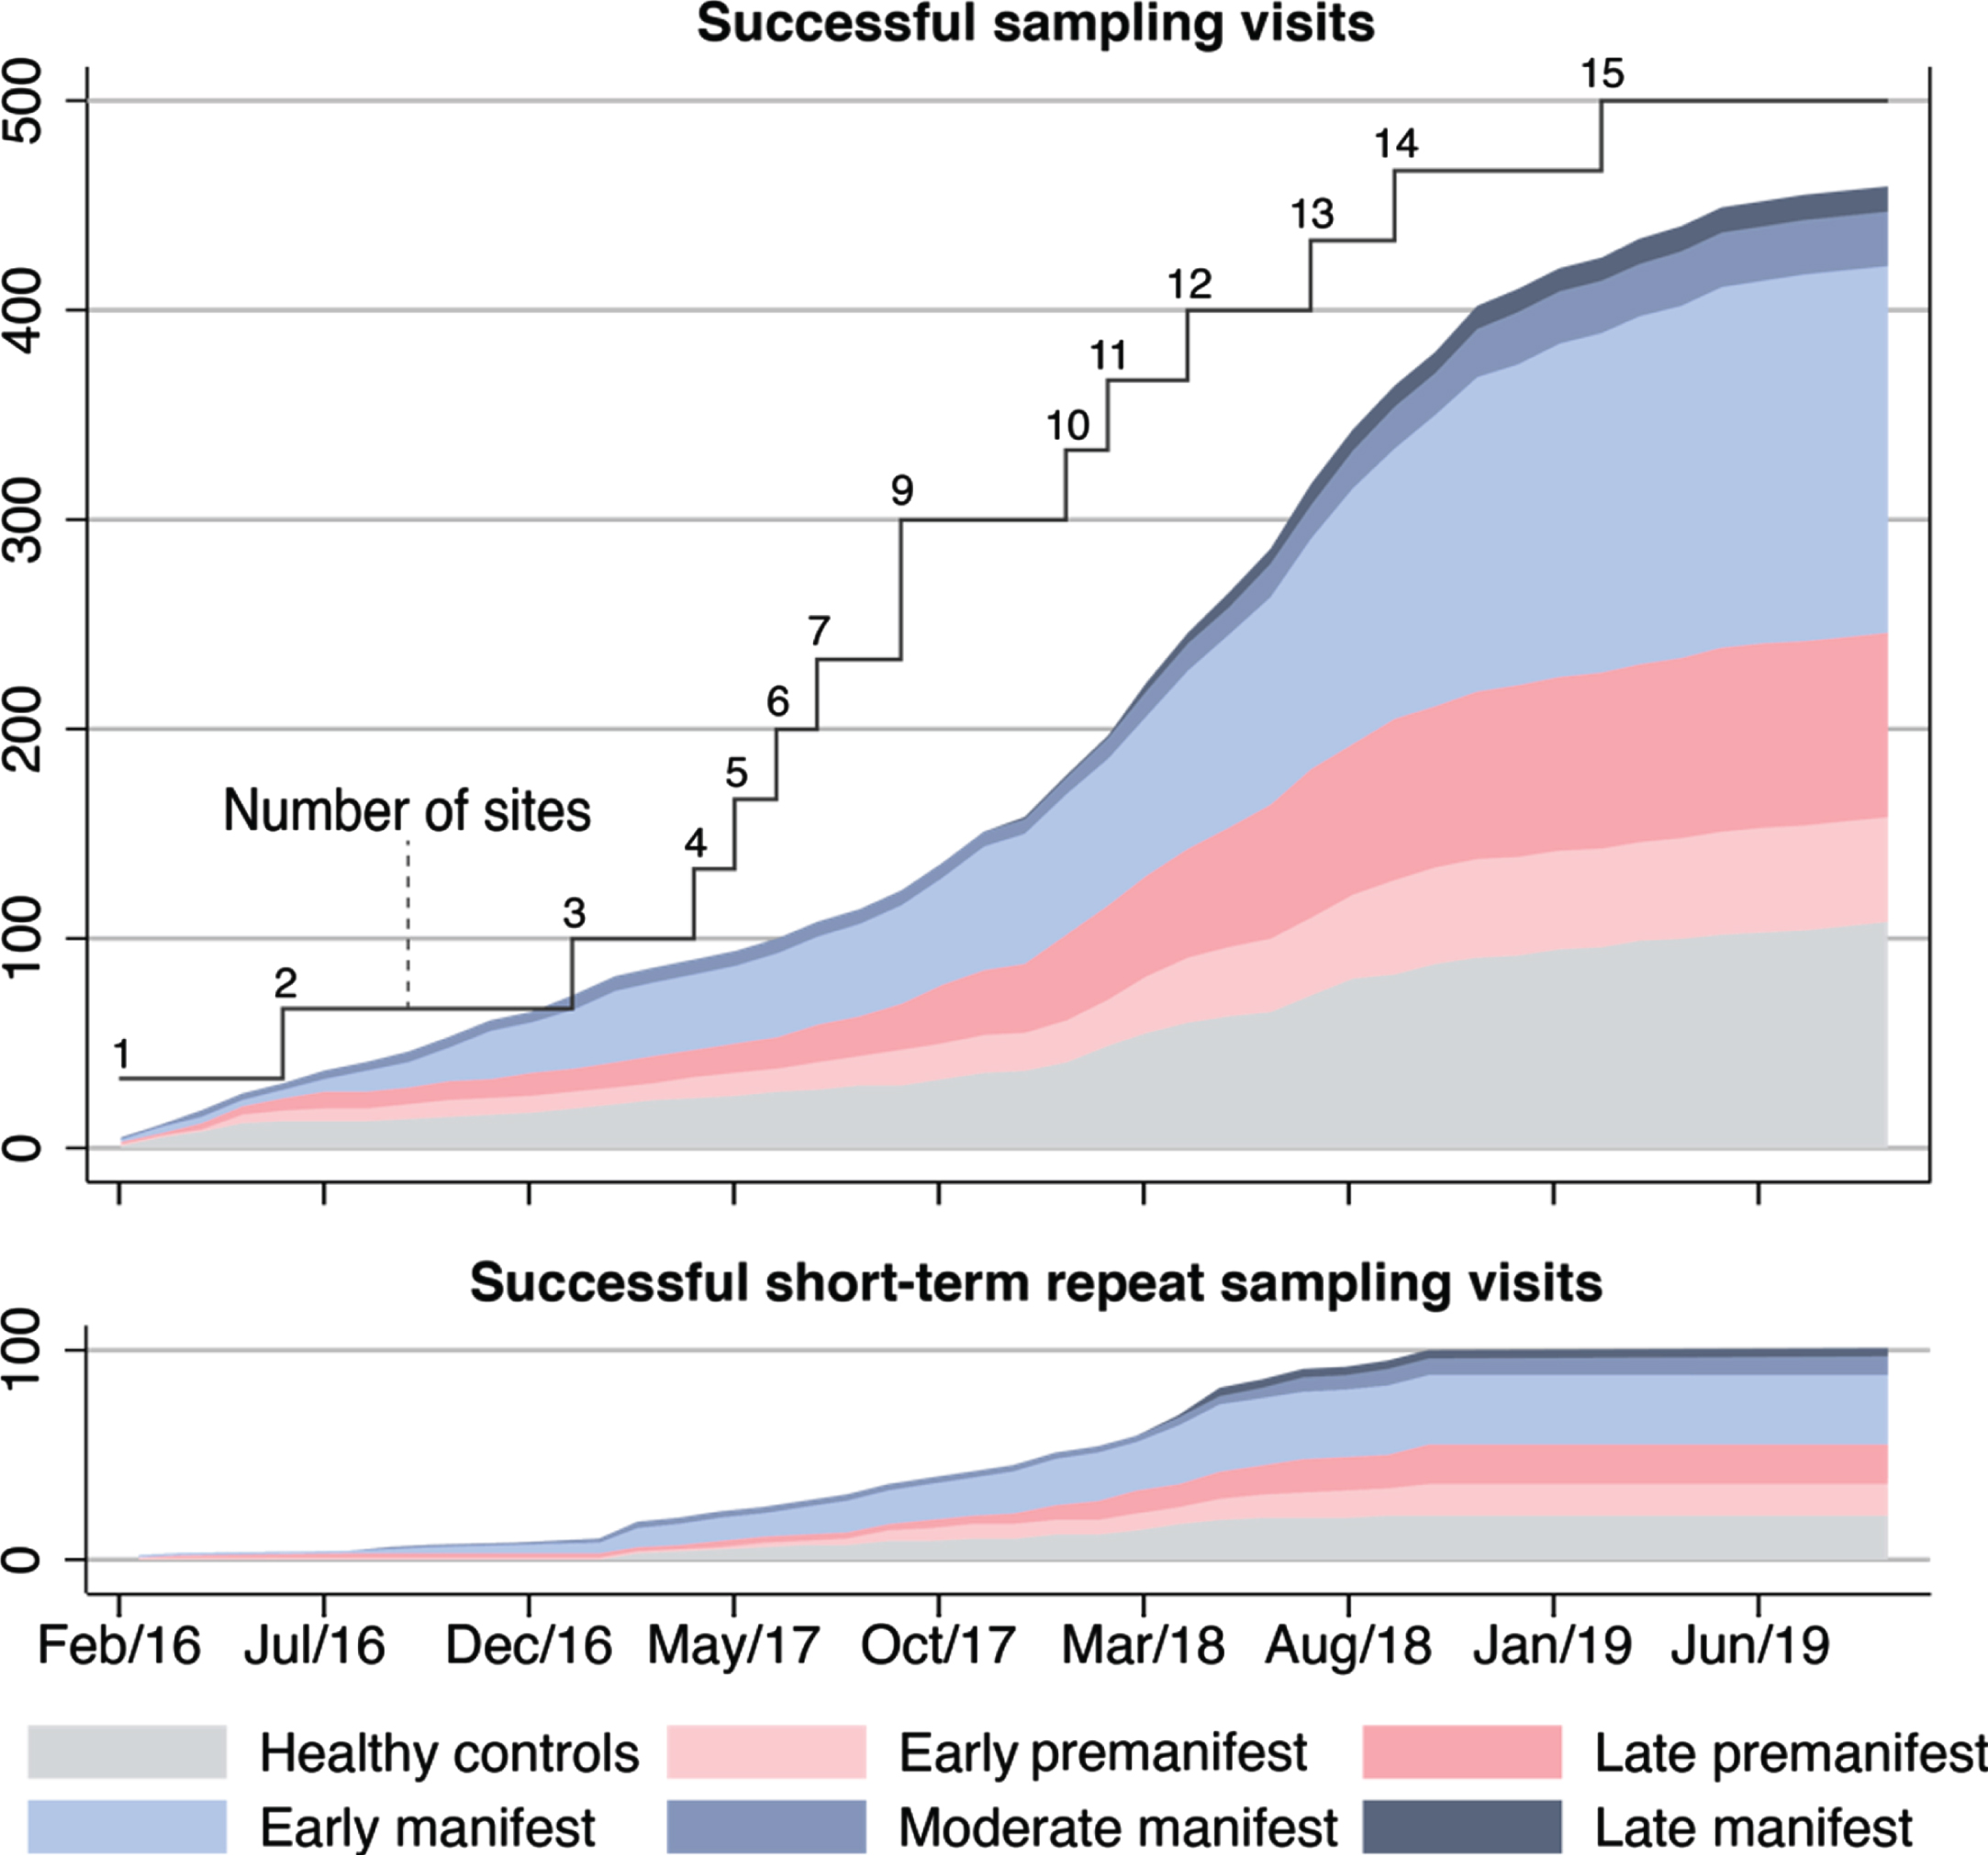 Successful sampling and short-term repeat sampling visits over time. Successful visits were defined as when dura was pierced and CSF was collected, irrespective of amount of CSF. Short-term repeat sampling visits were paused across most participant groups in early 2019 when the initial target numbers were reached; hence no fully monitored visits of this kind were captured in the dataset from January to September 2019.